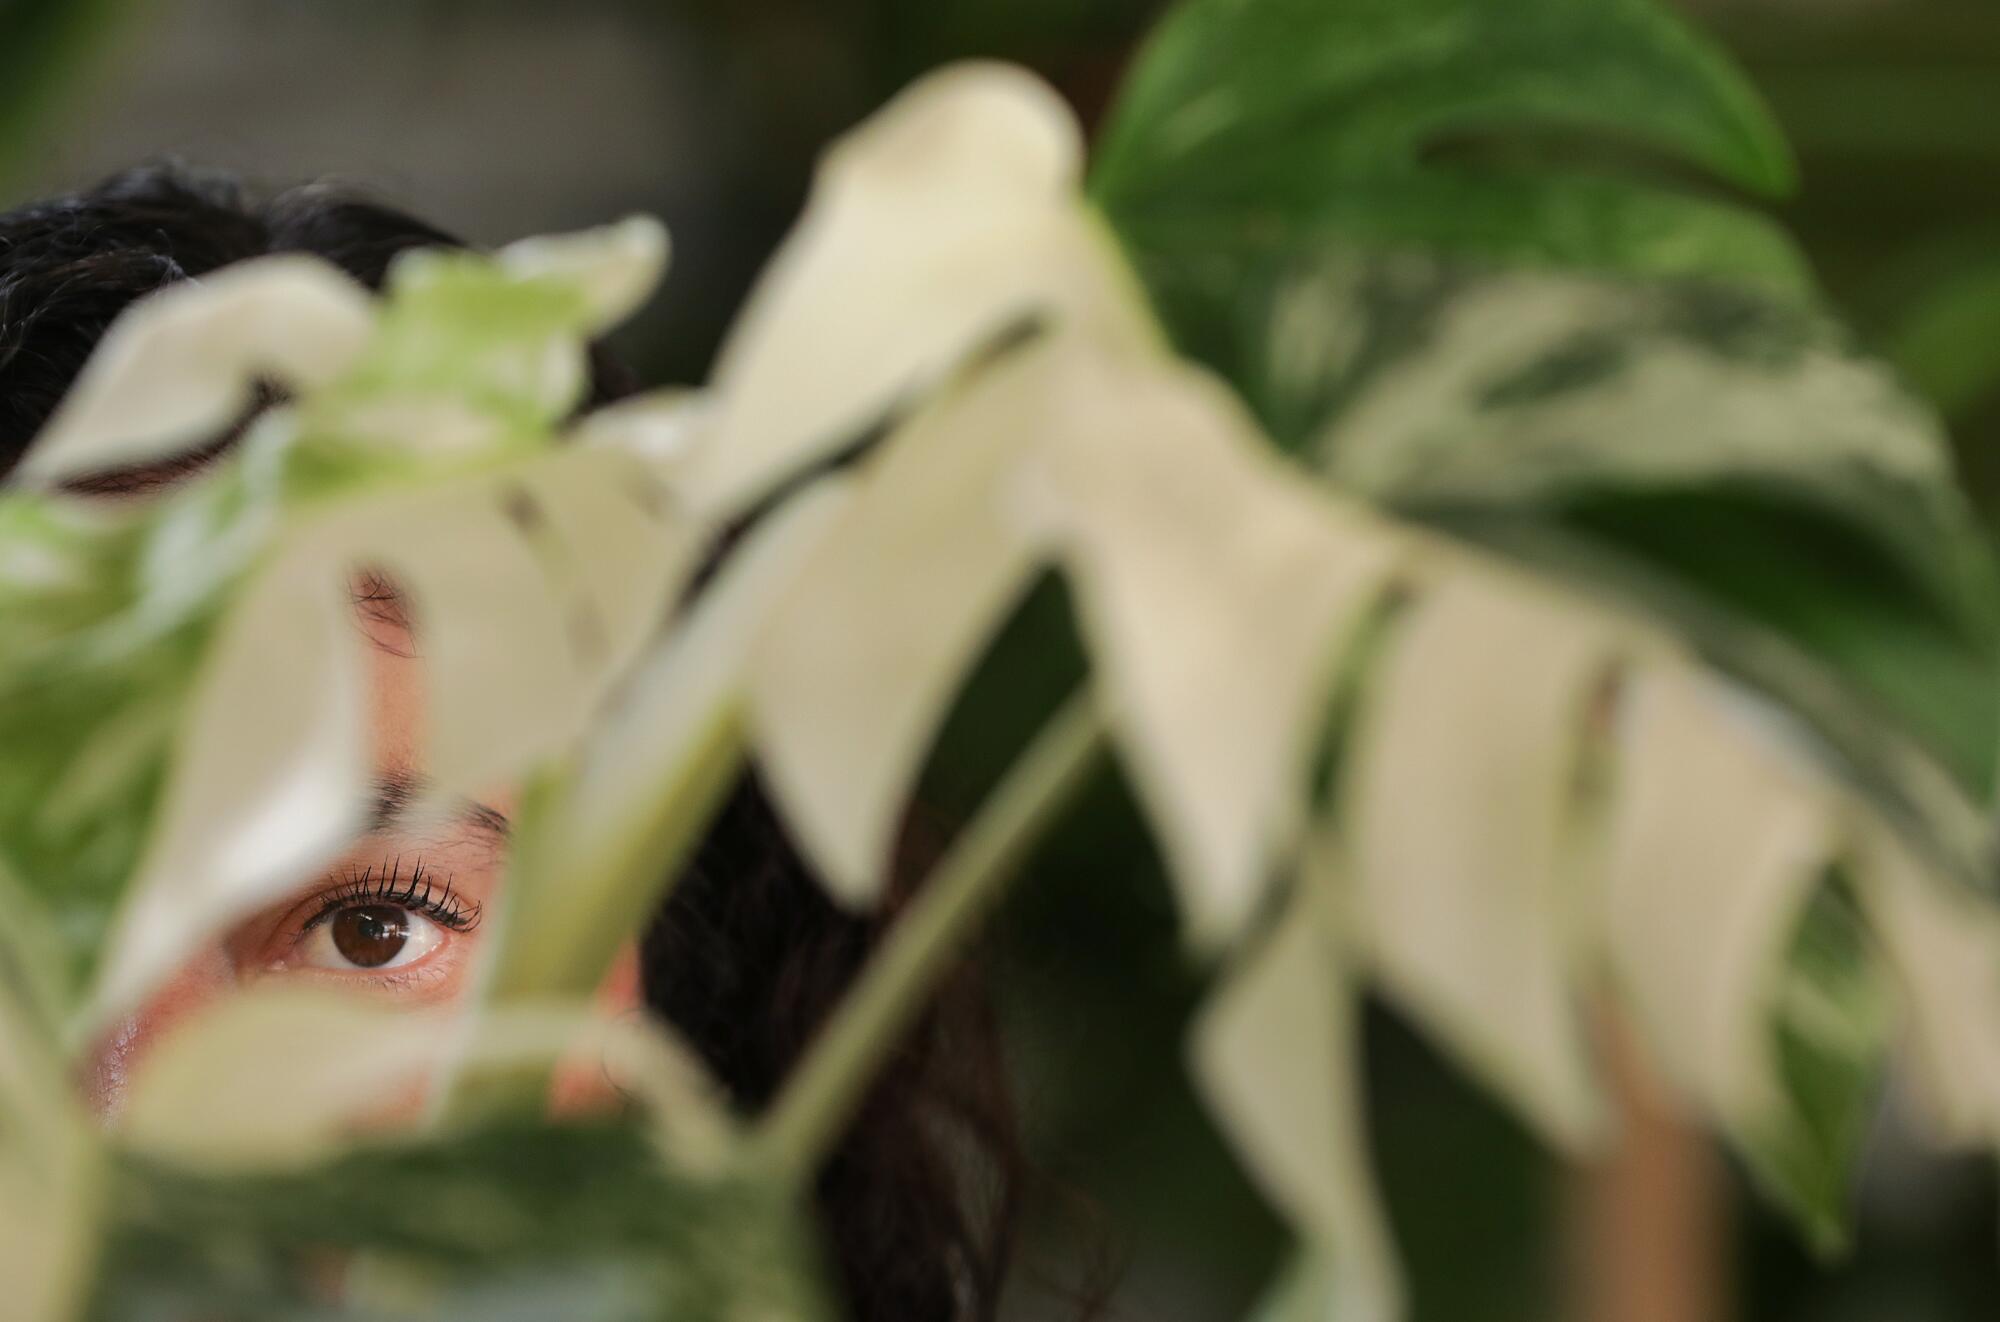 Sandra Mejia, gazing at the camera while mostly obscured by a plant in the foreground.